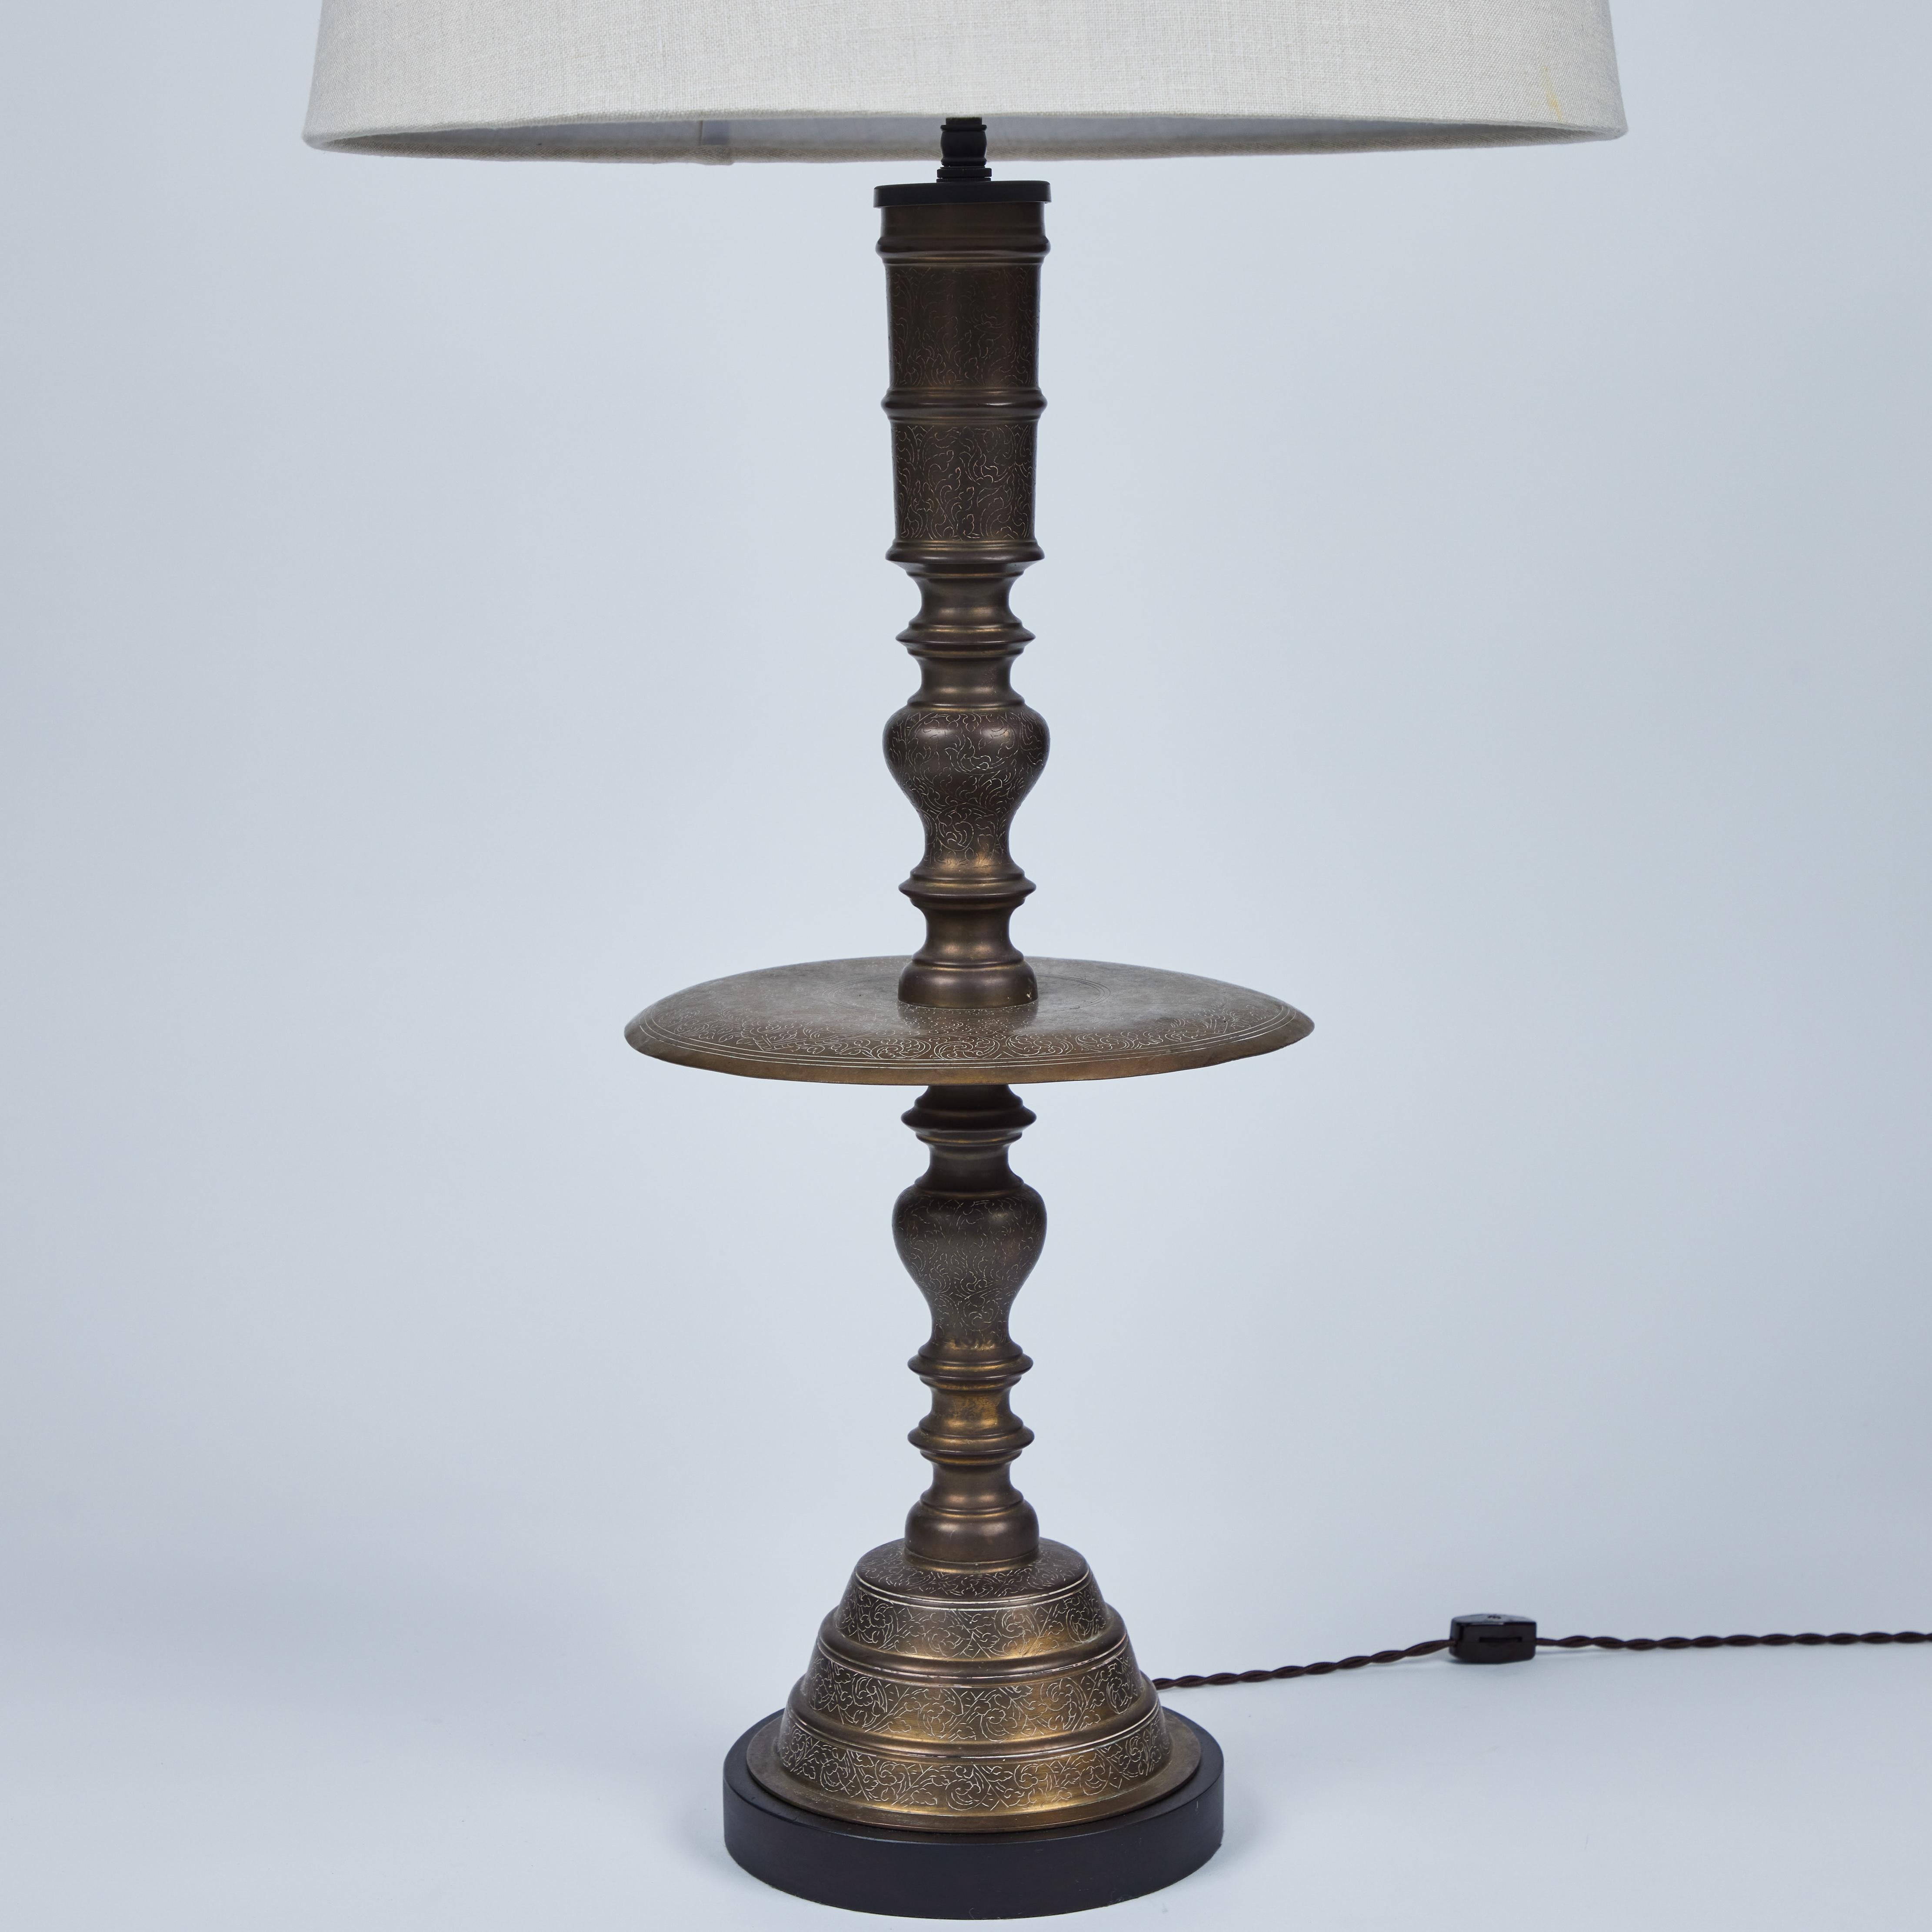 These large intricately engraved vintage brass Moroccan candlesticks with large decorative drip catcher have been newly made into this pair of striking and eye catching table lamps. They have lovely custom linen shades and beautiful new wood bases. 